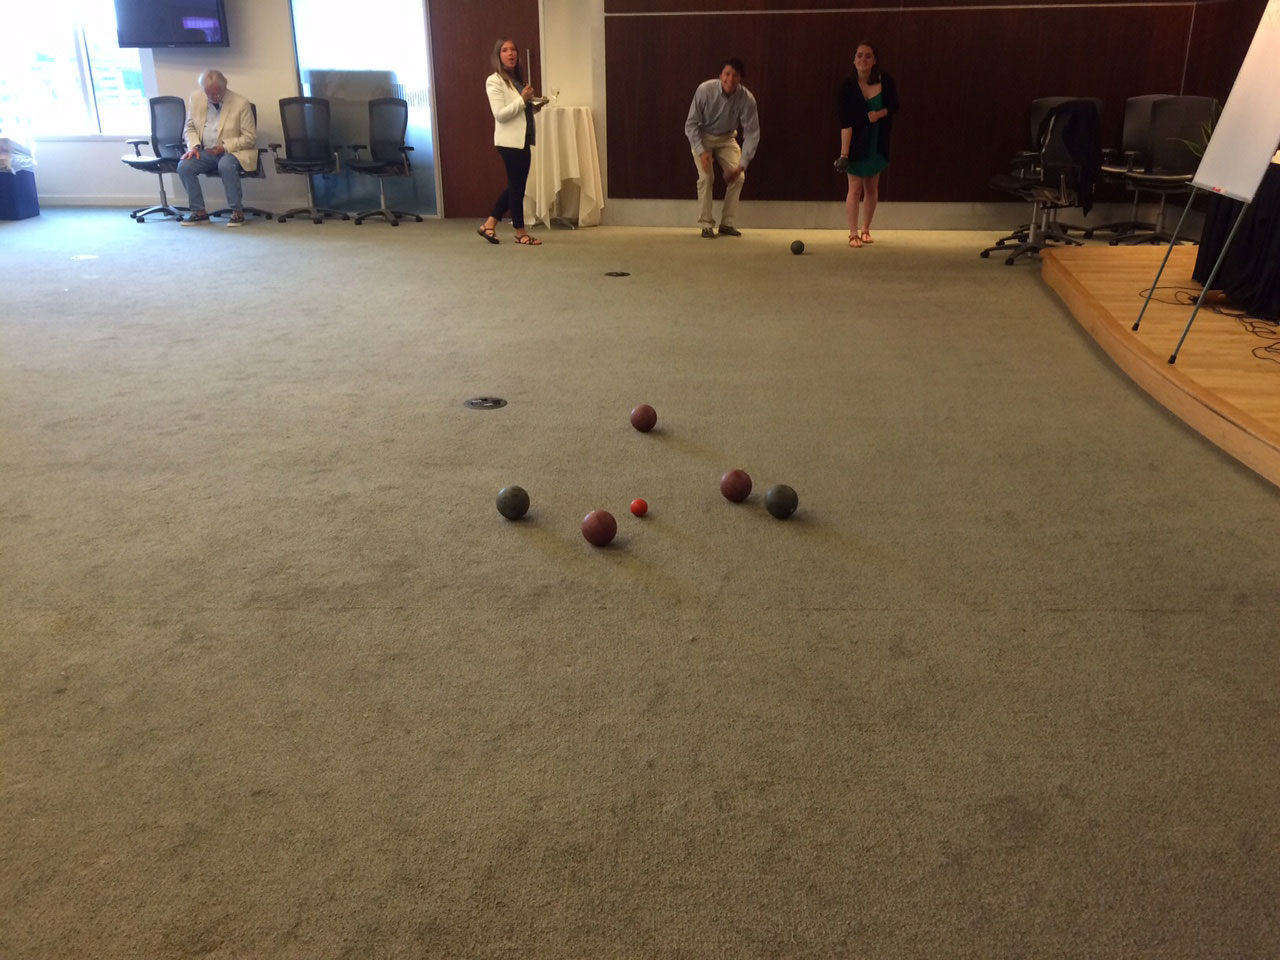 The tournament was moved inside and played on the carpet. (WTOP/Noah Frank)